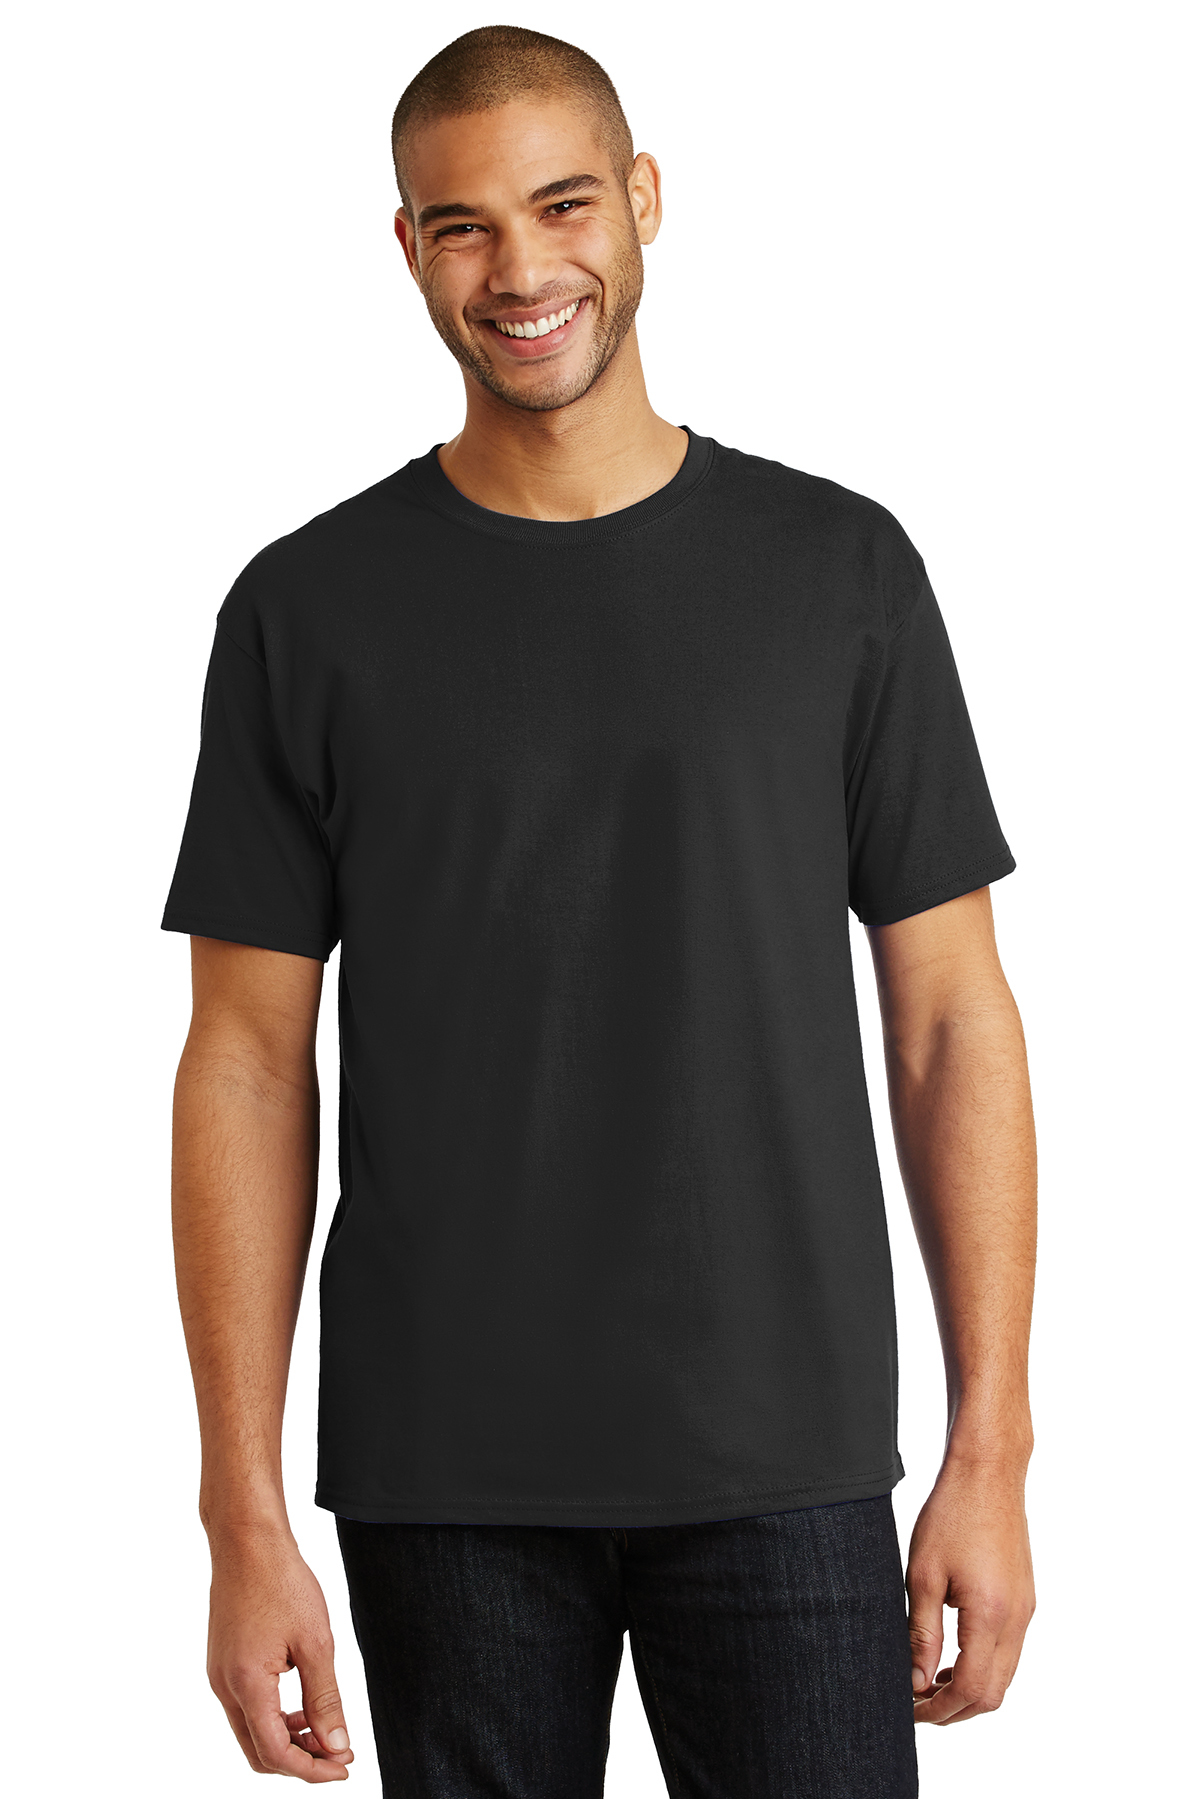 Hanes Authentic 100 Cotton T Shirt Product Company Casuals